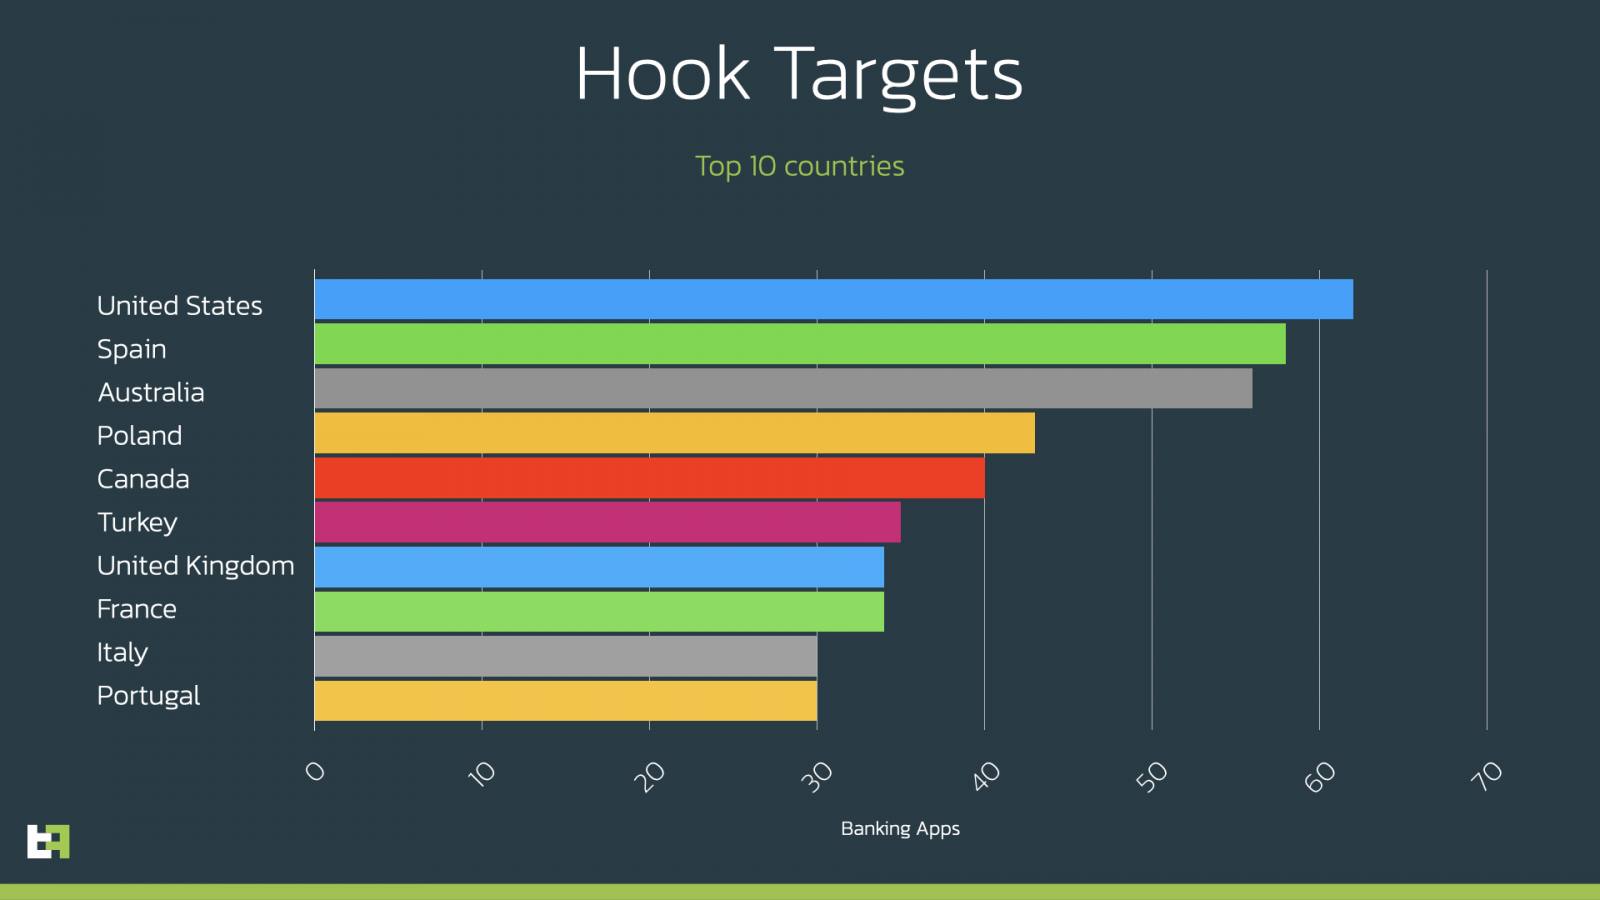 Number of banking apps per country targeted by Hook